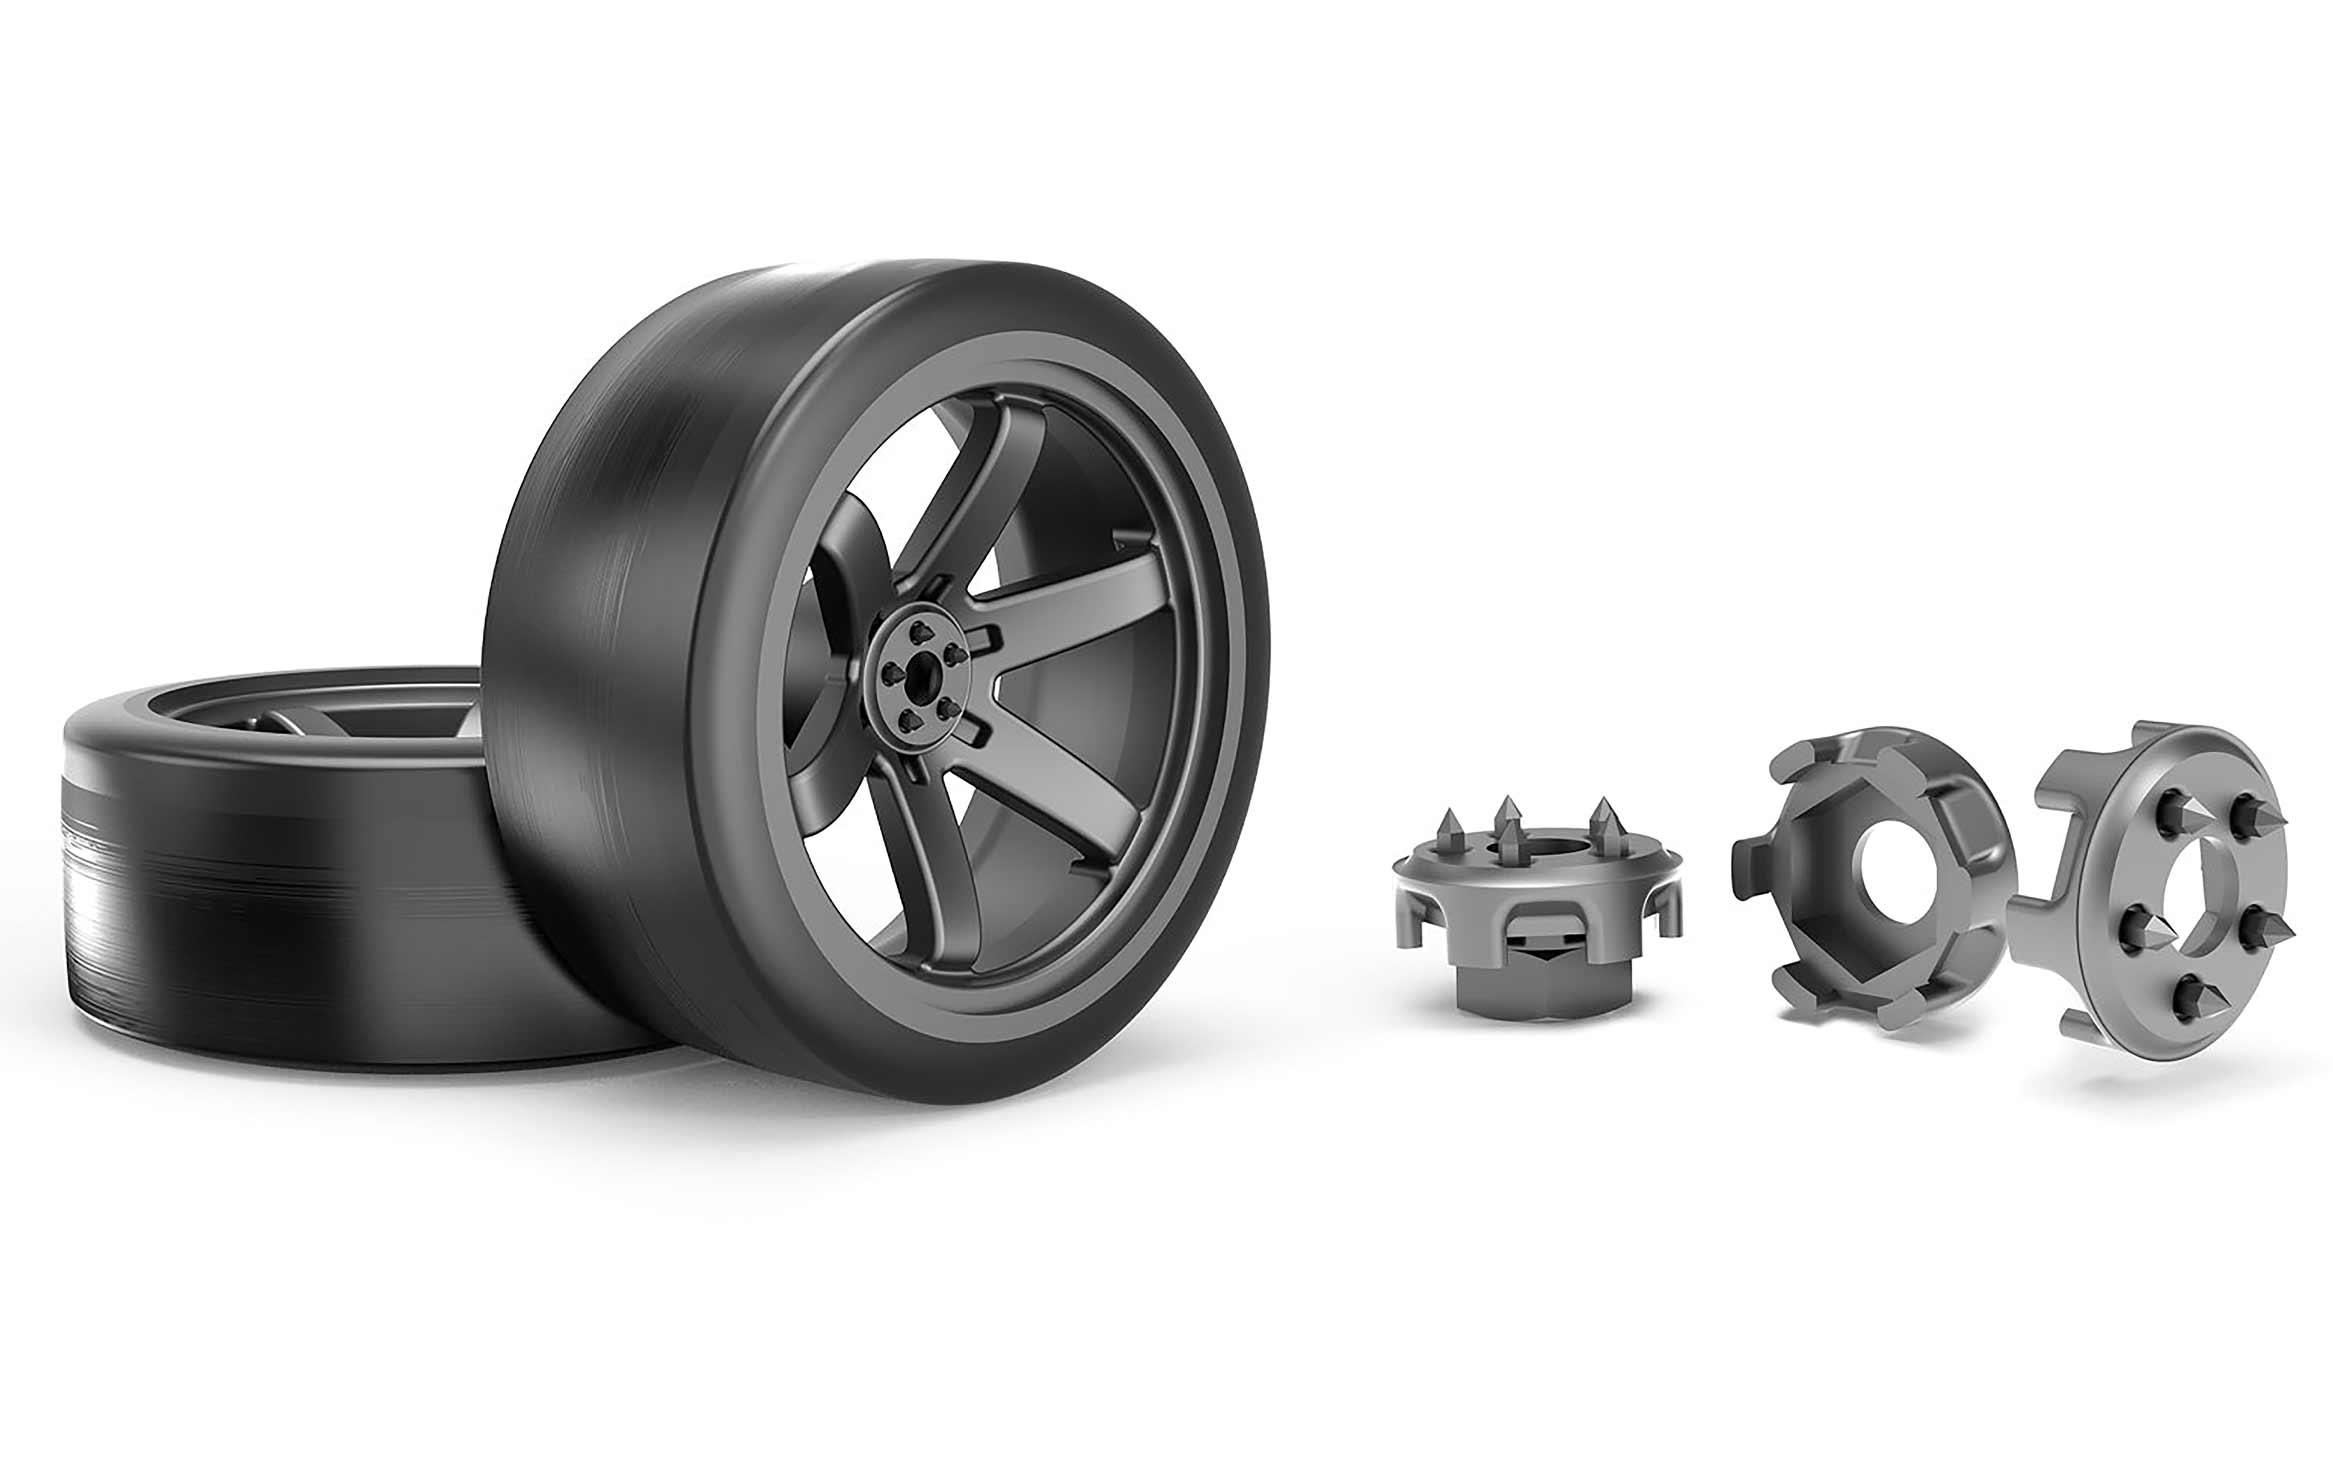 HDPE Drift Tires and Scale Wheel Nut Covers